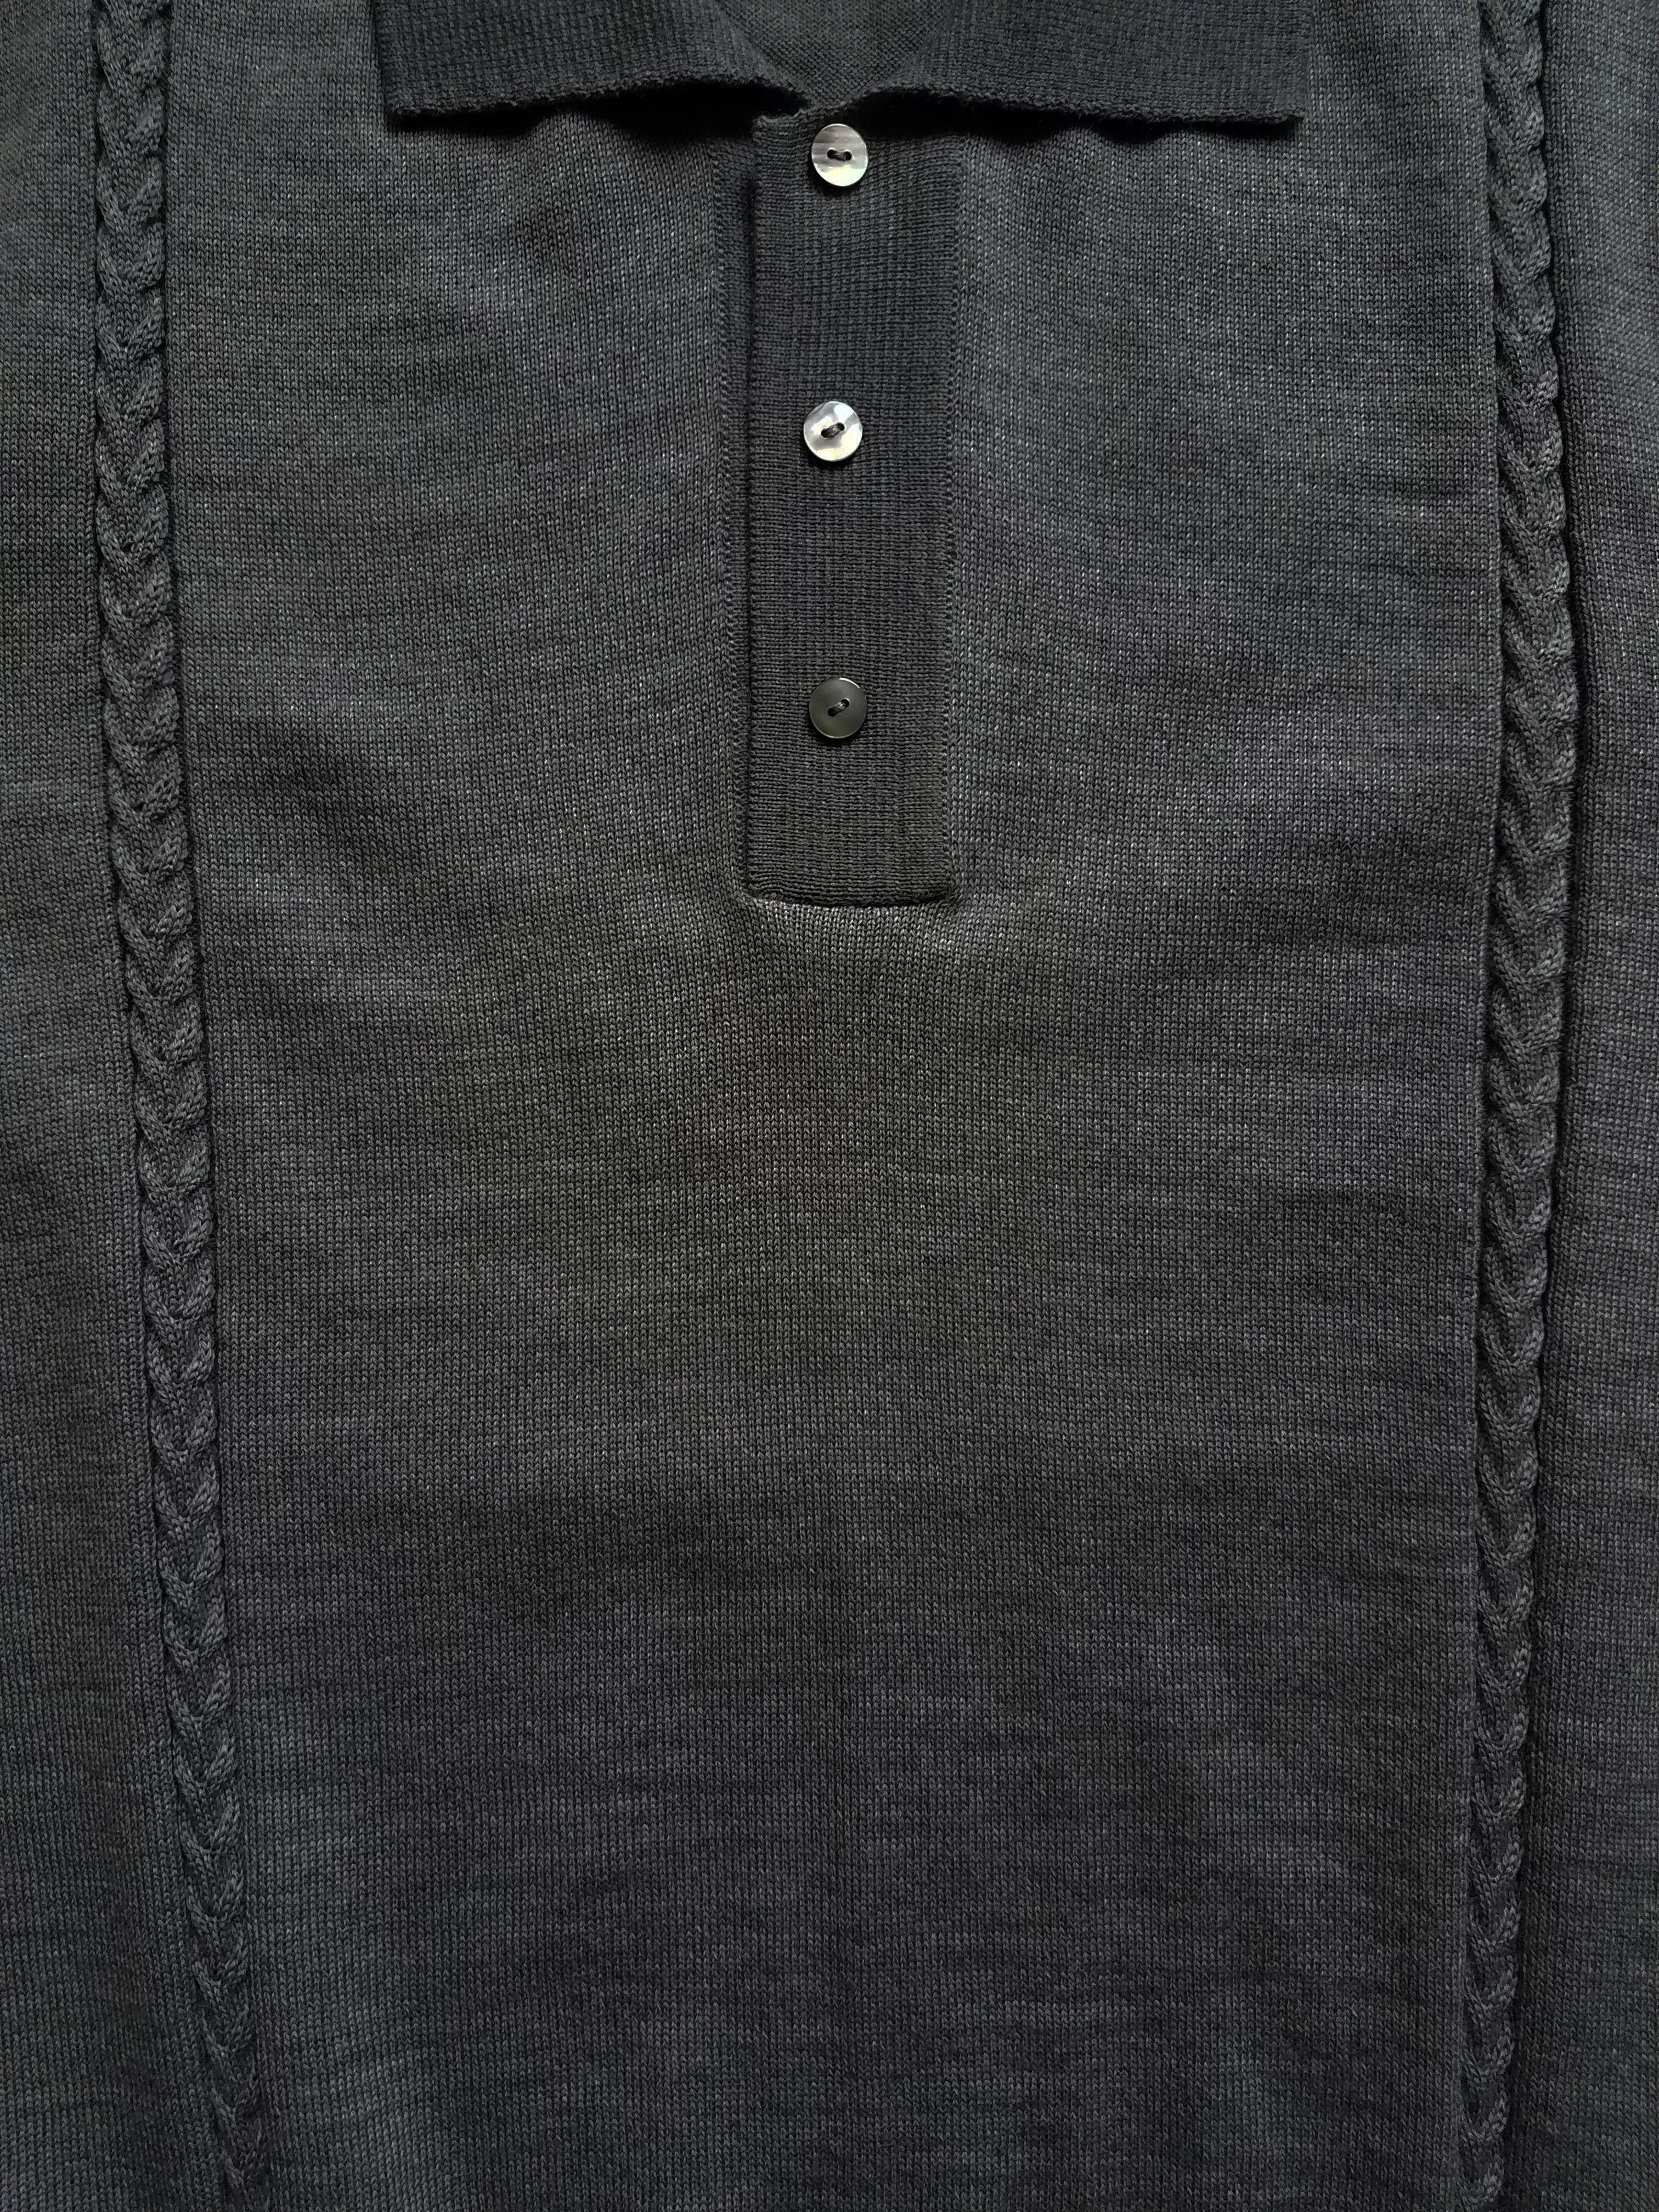 black cable knit polo